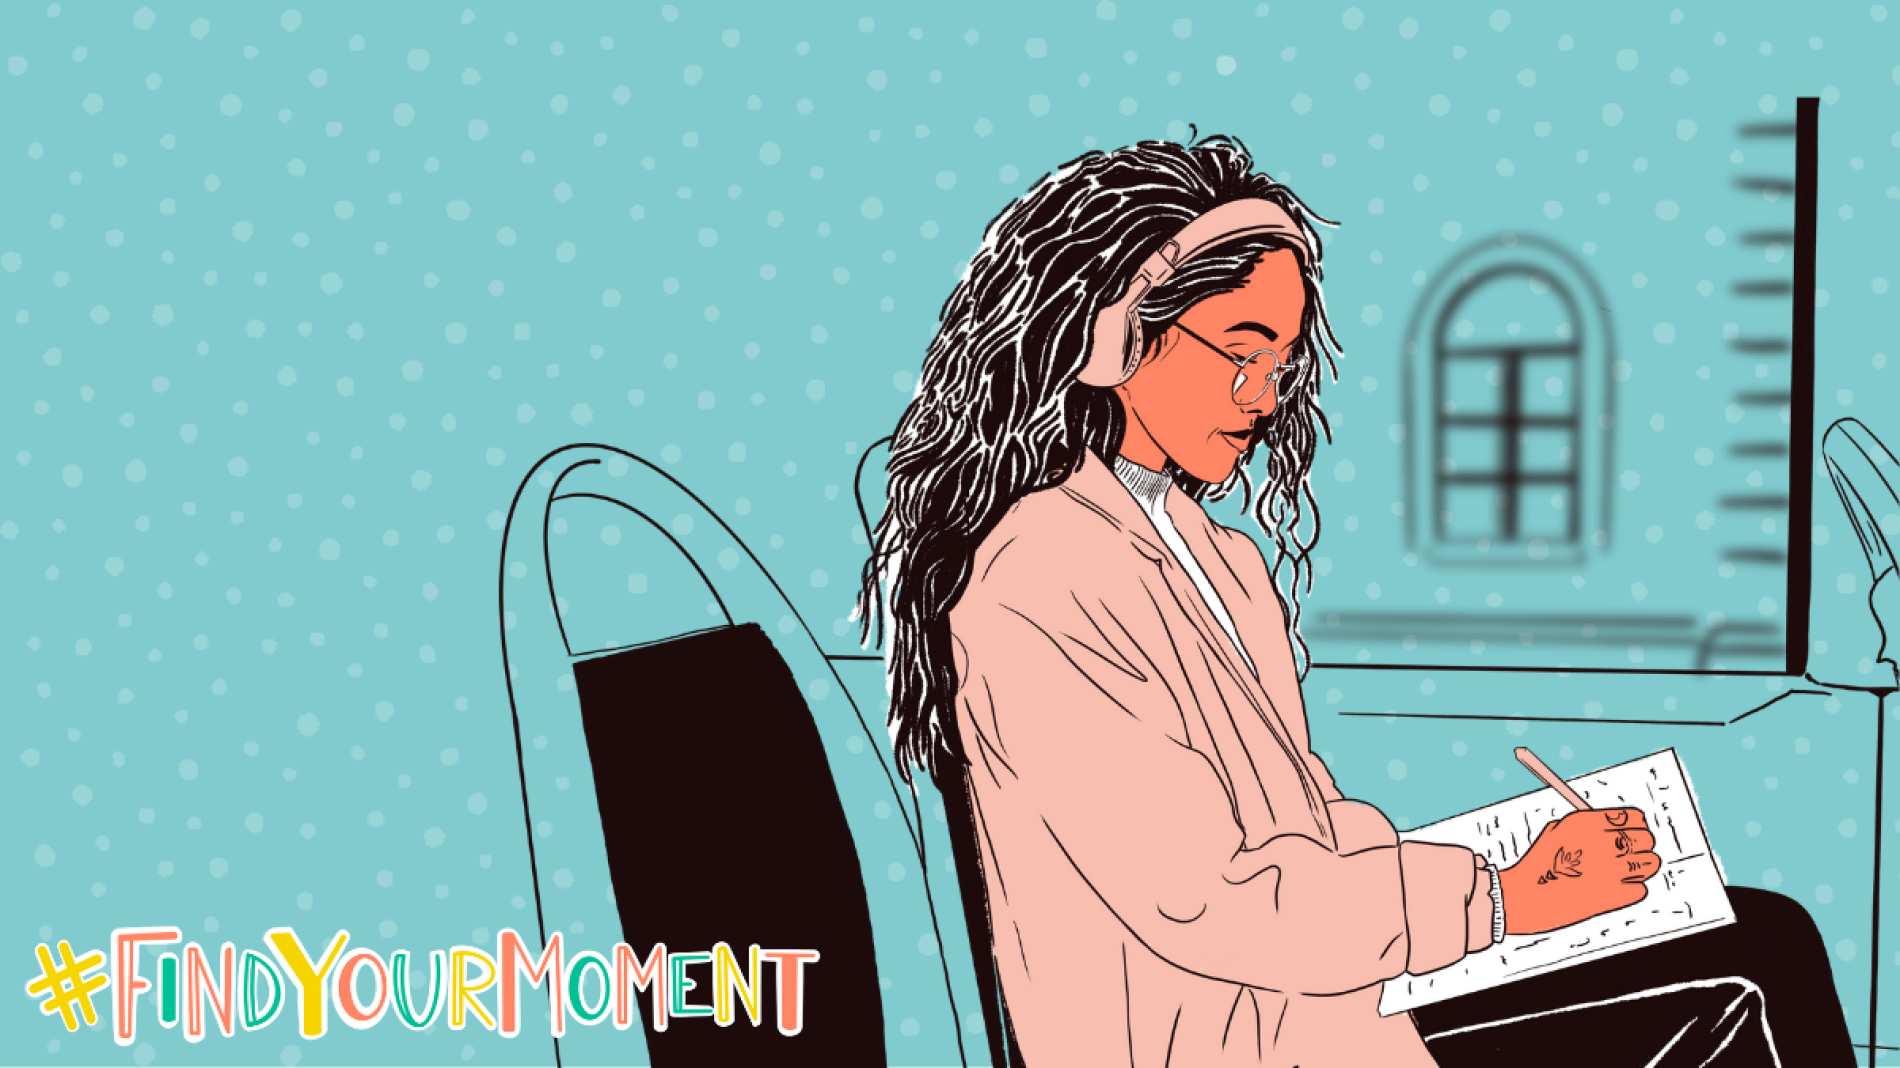 Illustration of a person sitting at a desk with a notepad and listening to music